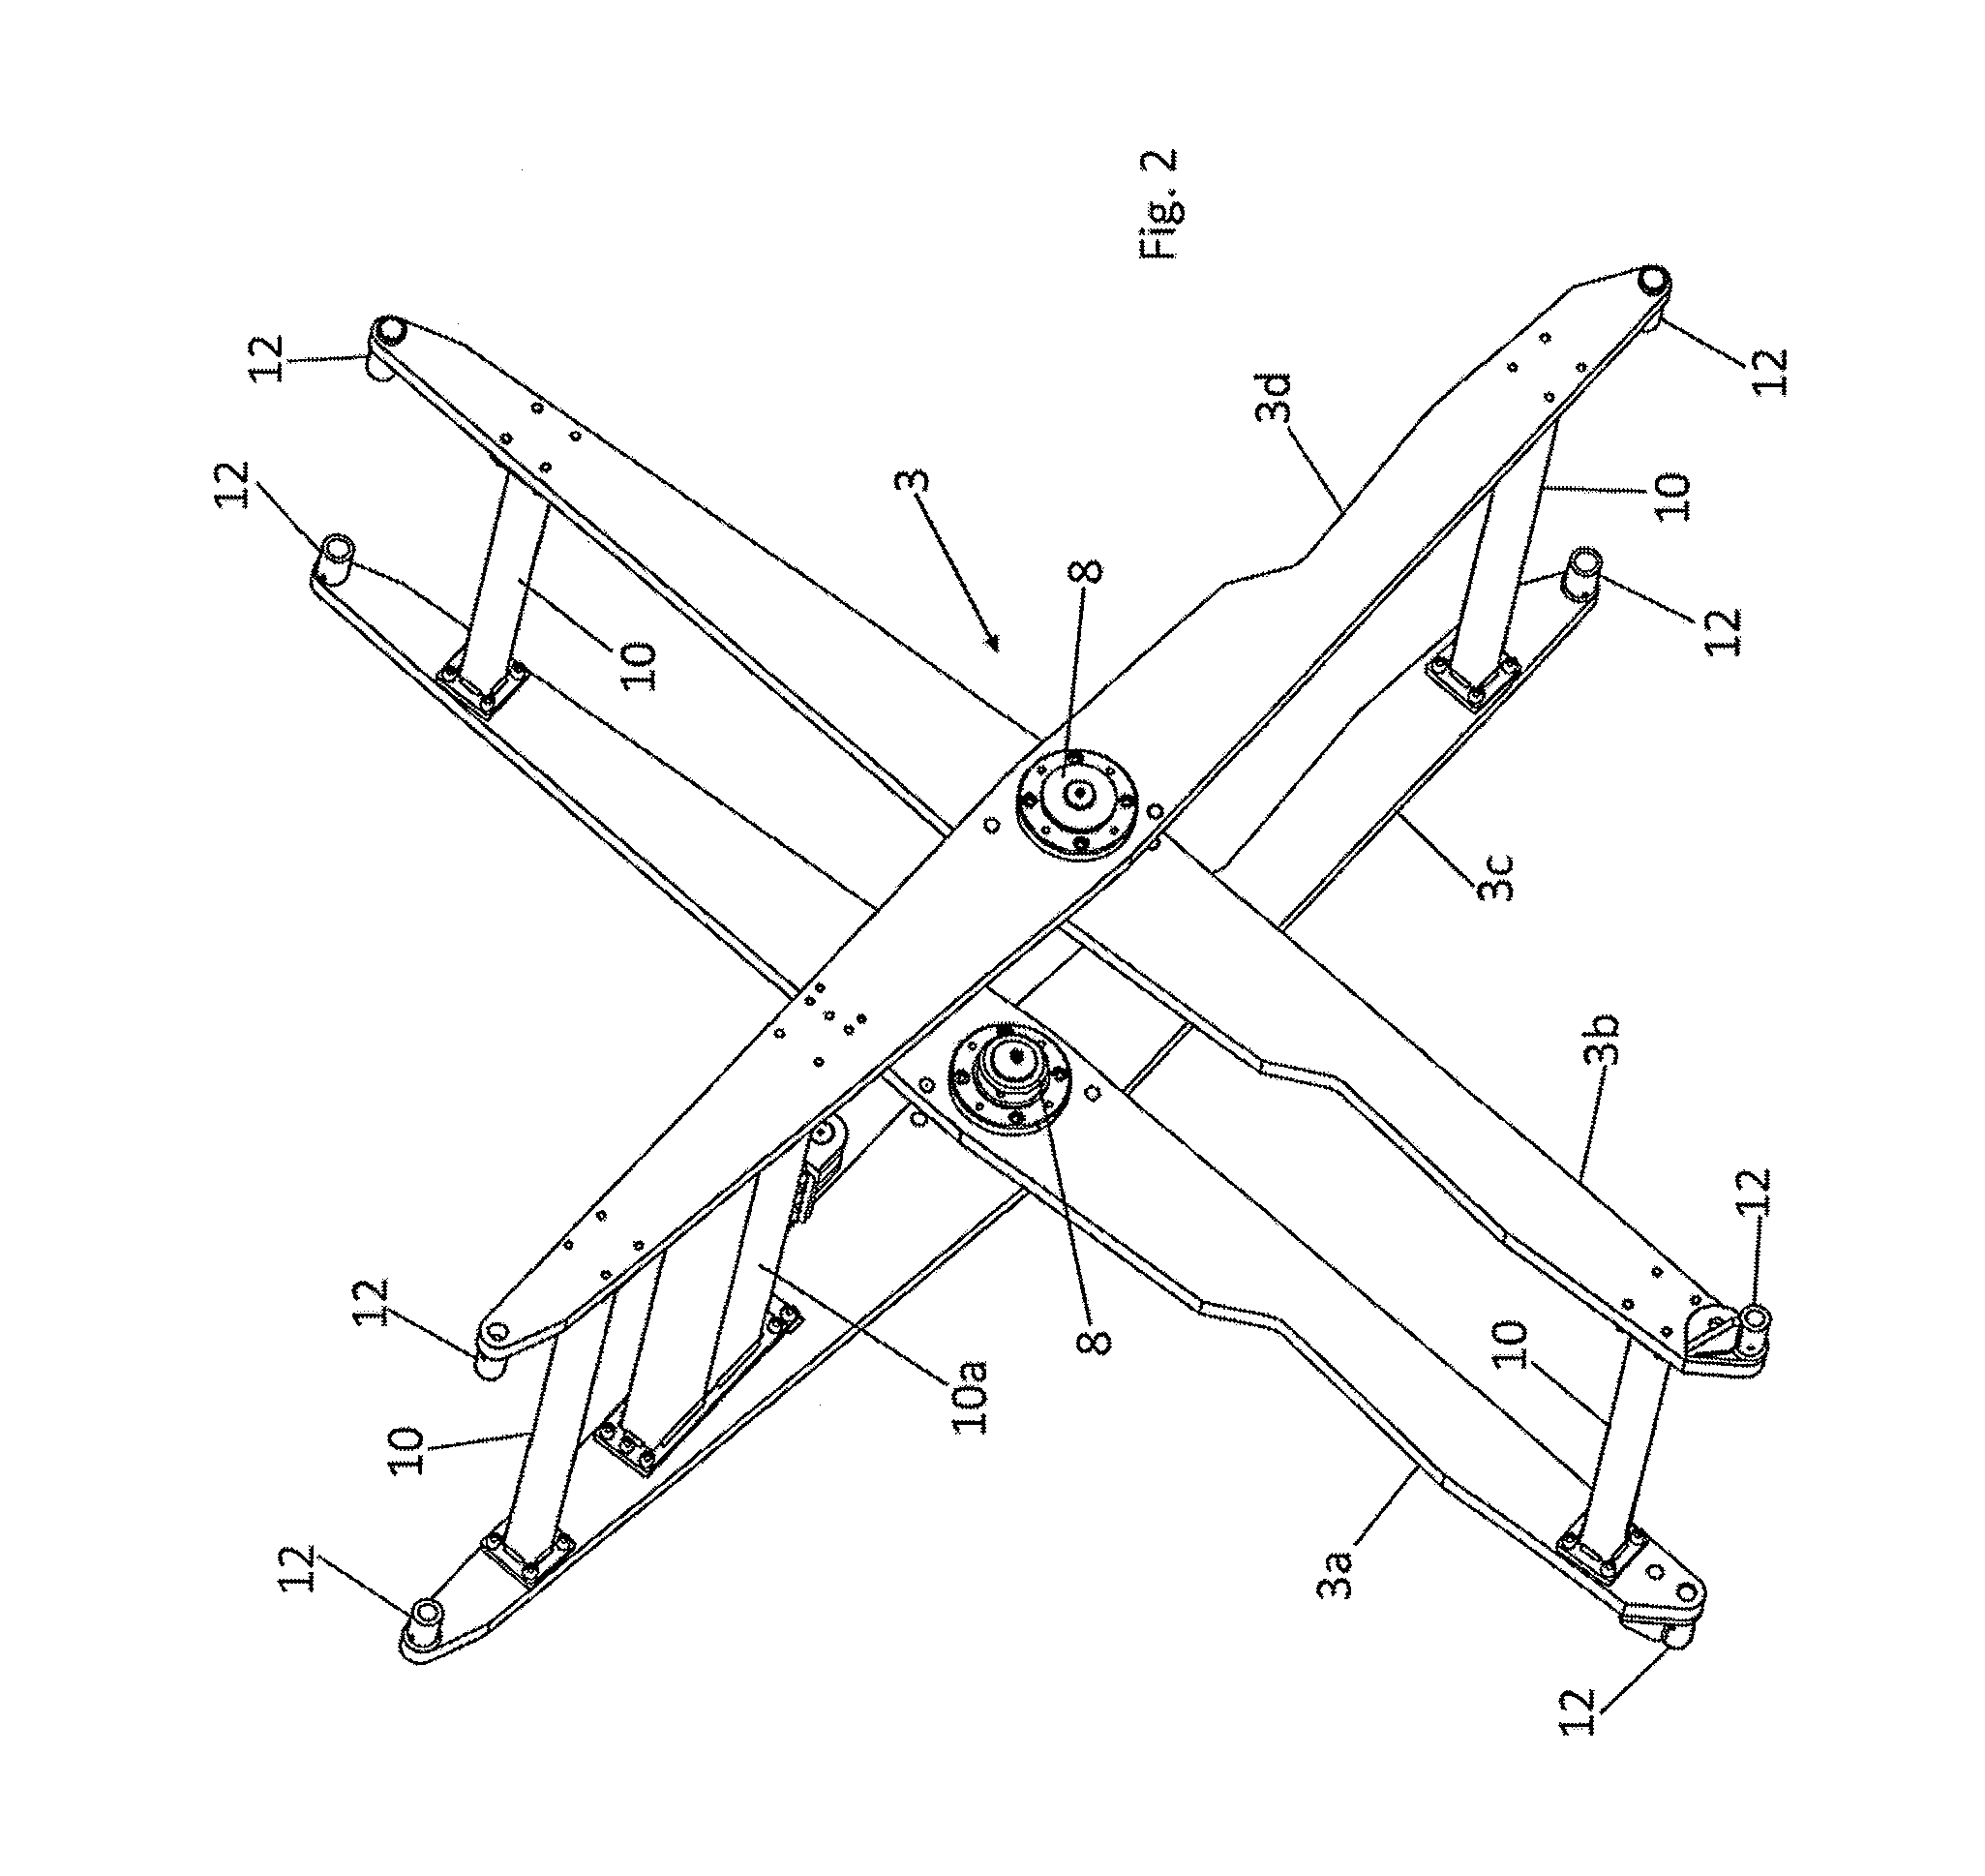 Scissors lifting table and method of assembling a scissors lifting table